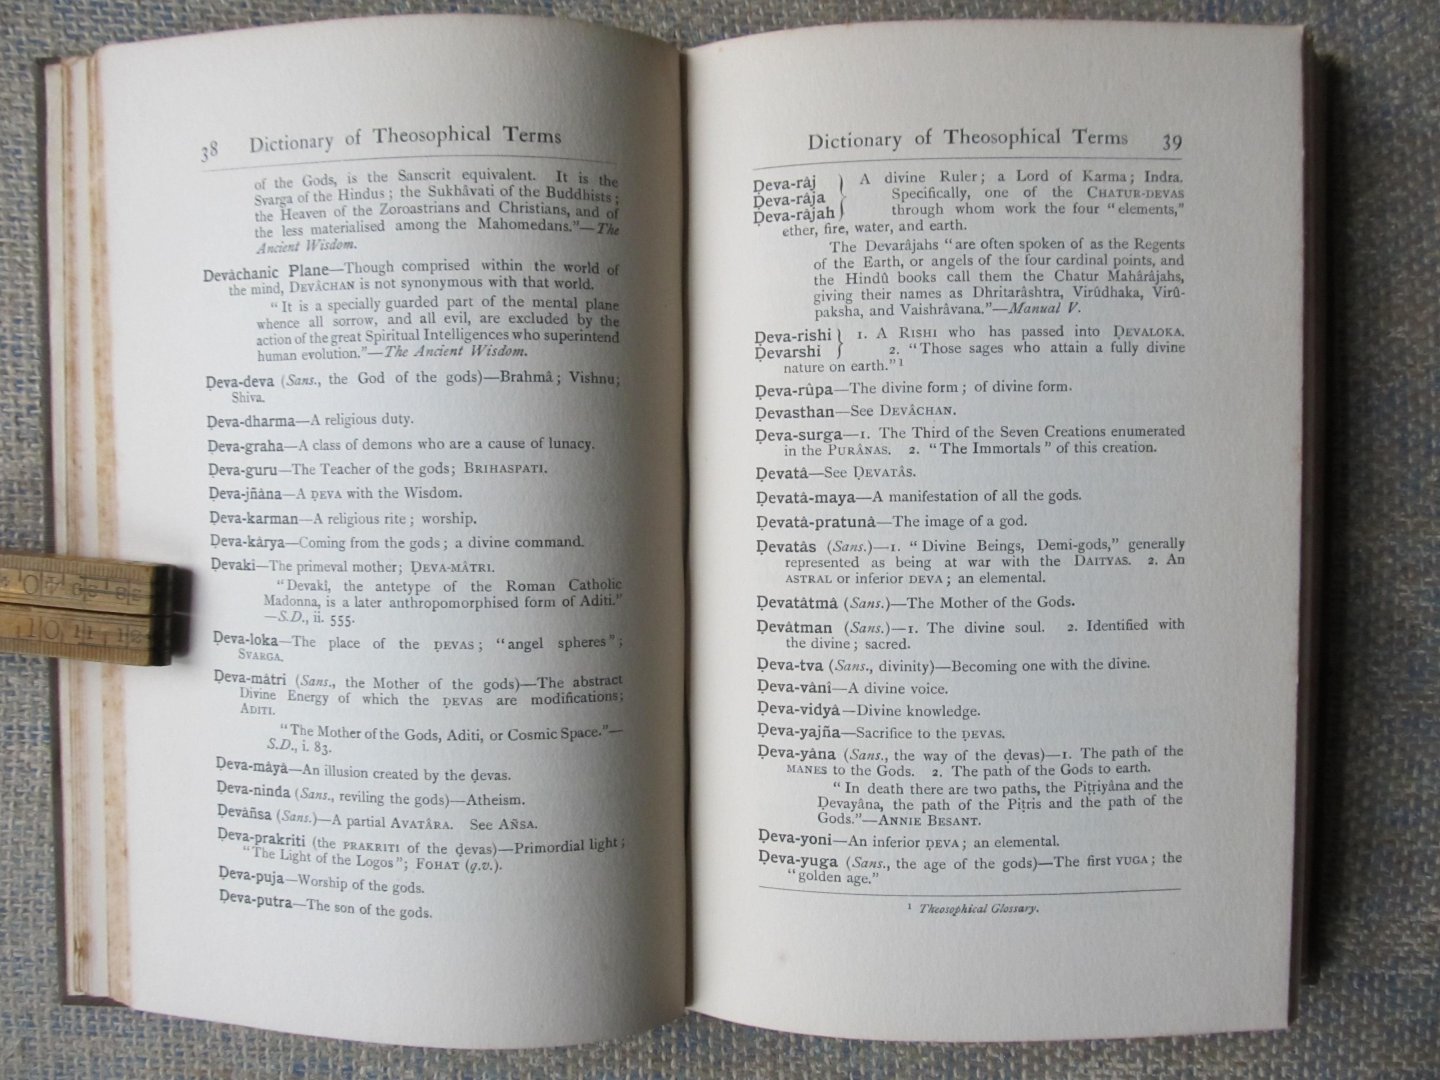 Hoult, Powis - A DICTIONARY OF SOME THEOSOPHICAL TERMS